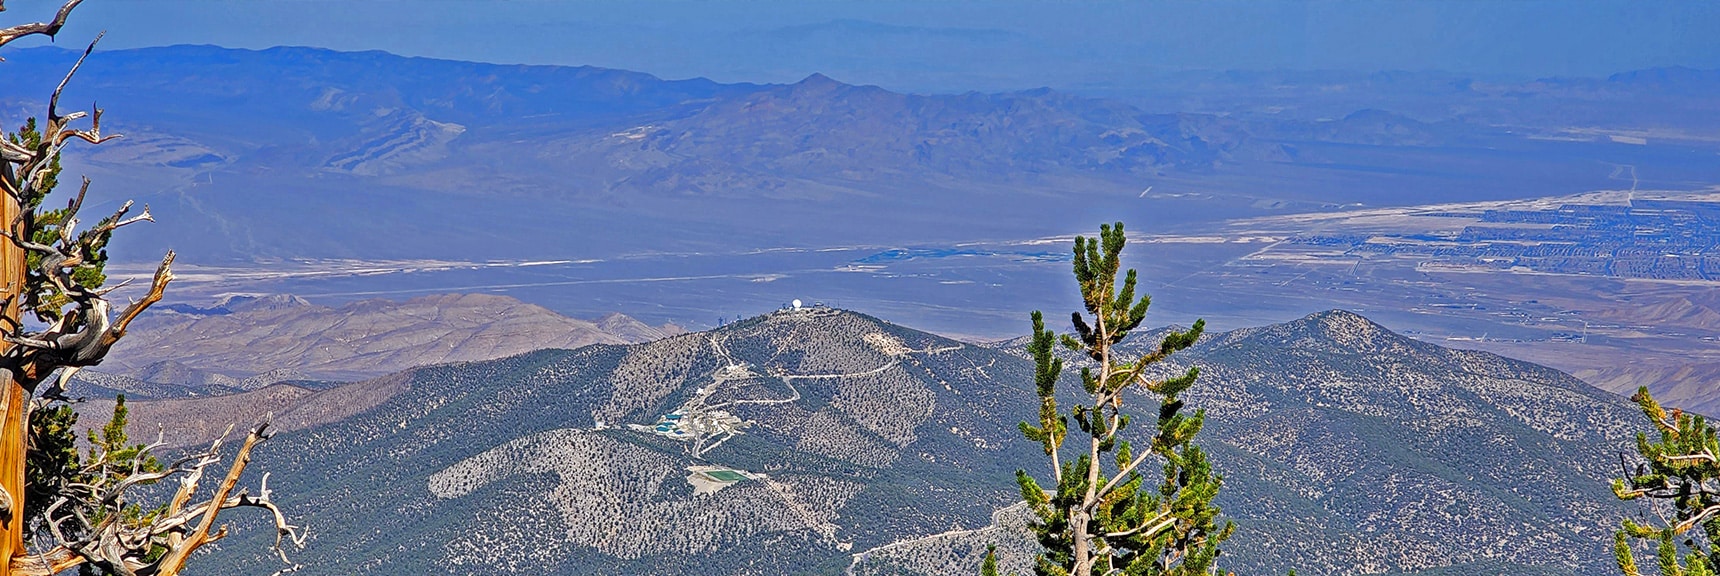 Angel Peak (Gass Peak and North Vegas Valley Background) from Descent Chute | Mummy Mountain Grand Crossing | Lee Canyon to Deer Creek Road | Mt Charleston Wilderness | Spring Mountains, Nevada |